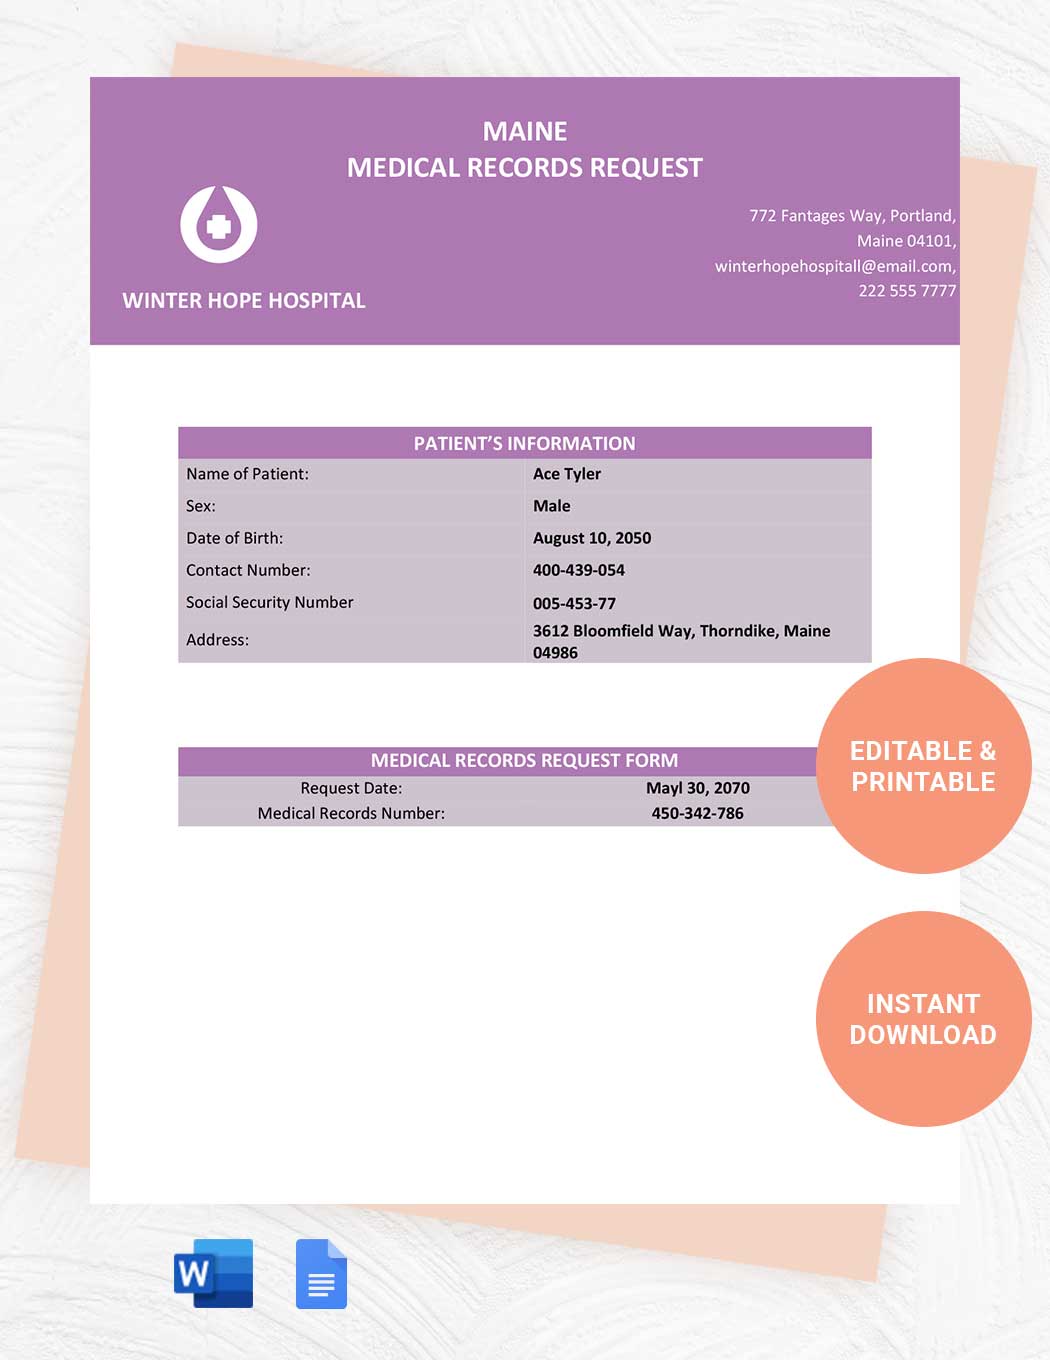 Maine Medical Records Request Template in Word, Google Docs